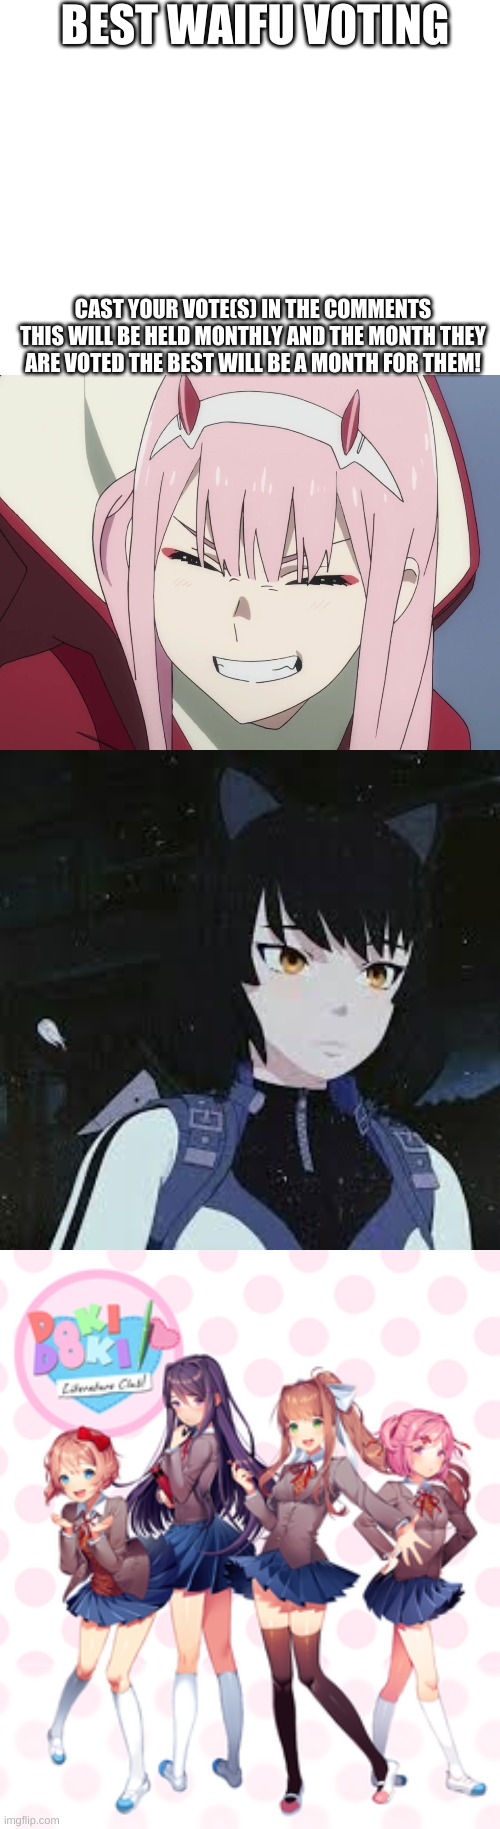 This does include ANY not featured in the image! (or husbandos) | BEST WAIFU VOTING; CAST YOUR VOTE(S) IN THE COMMENTS THIS WILL BE HELD MONTHLY AND THE MONTH THEY ARE VOTED THE BEST WILL BE A MONTH FOR THEM! | image tagged in blank white template,smiling zero-two,rwby blake,doki doki literature club | made w/ Imgflip meme maker